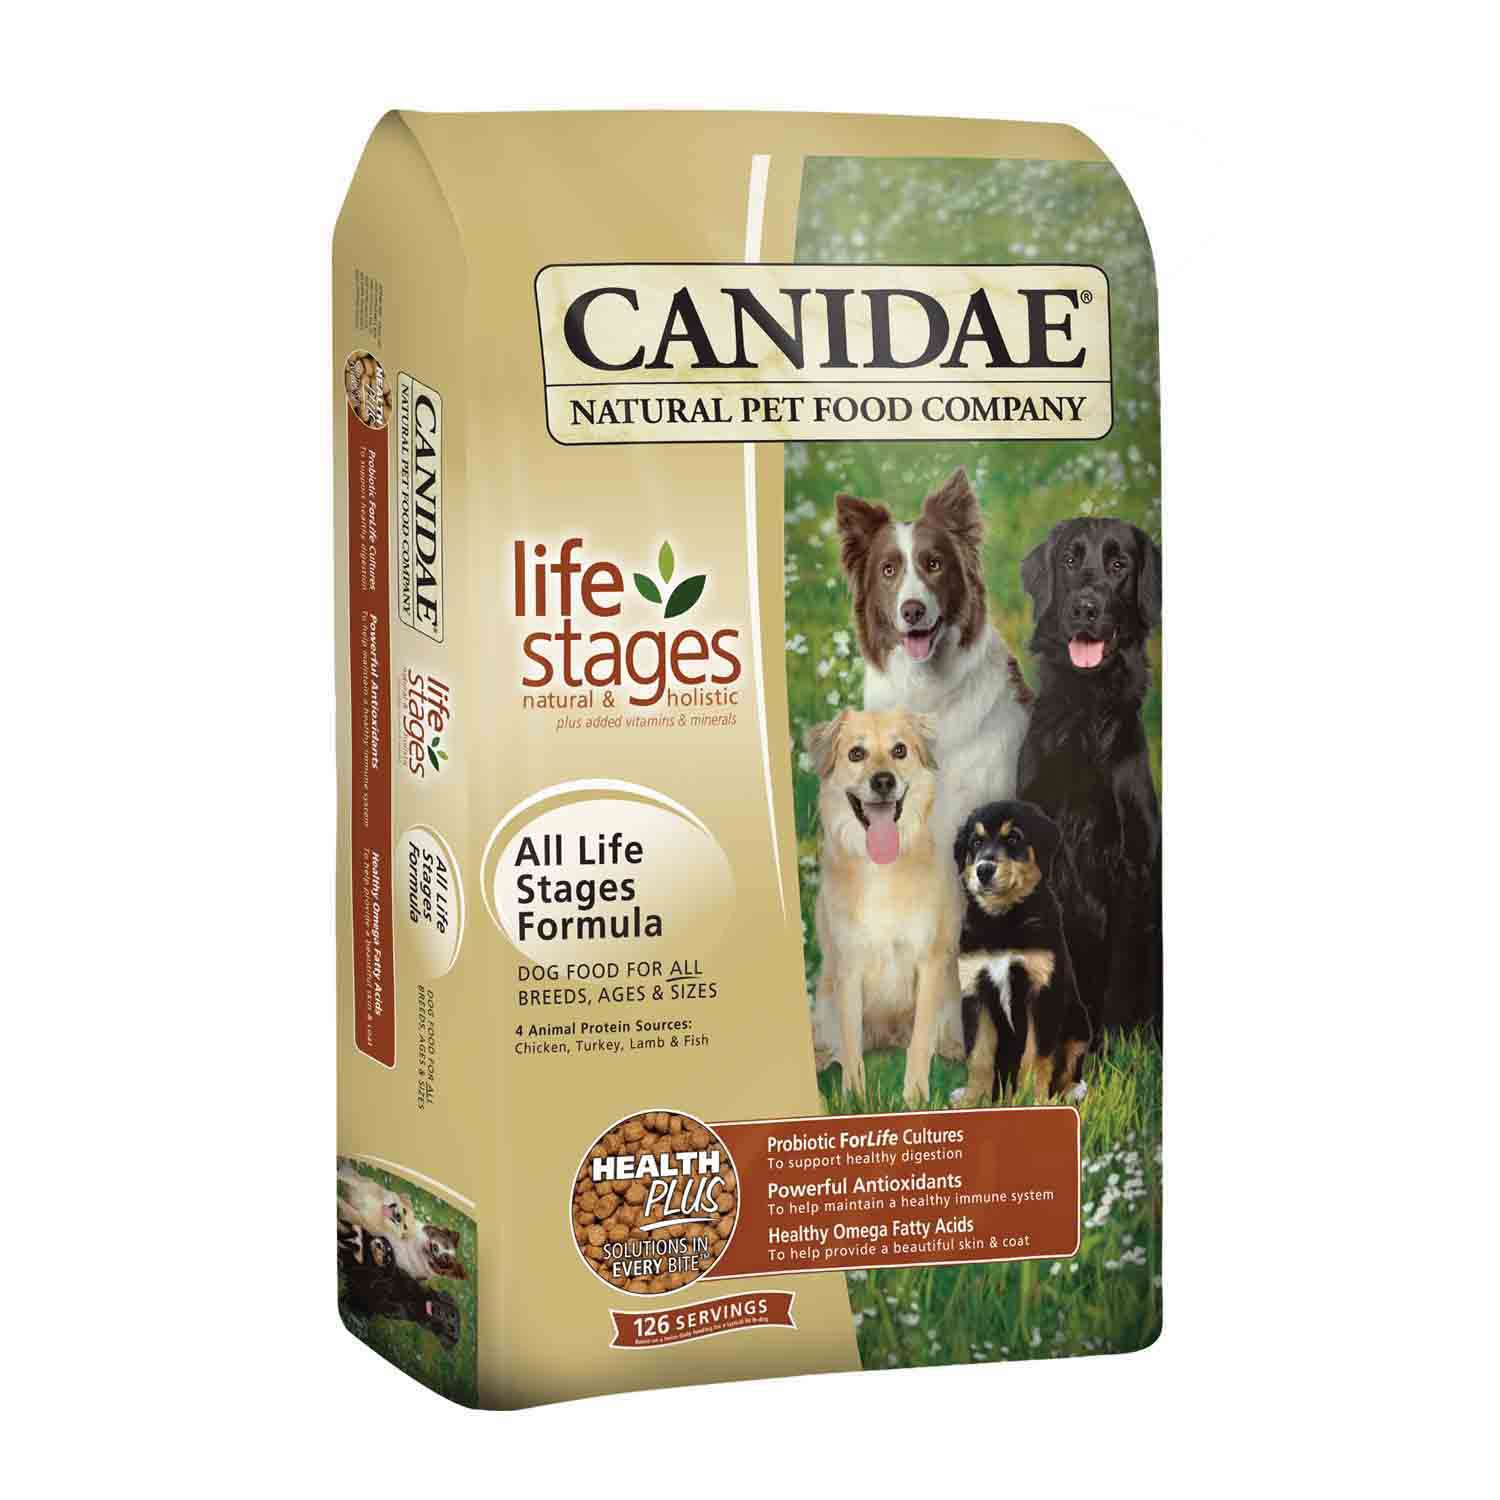 CANIDAE All Life Stages Formula for Dogs